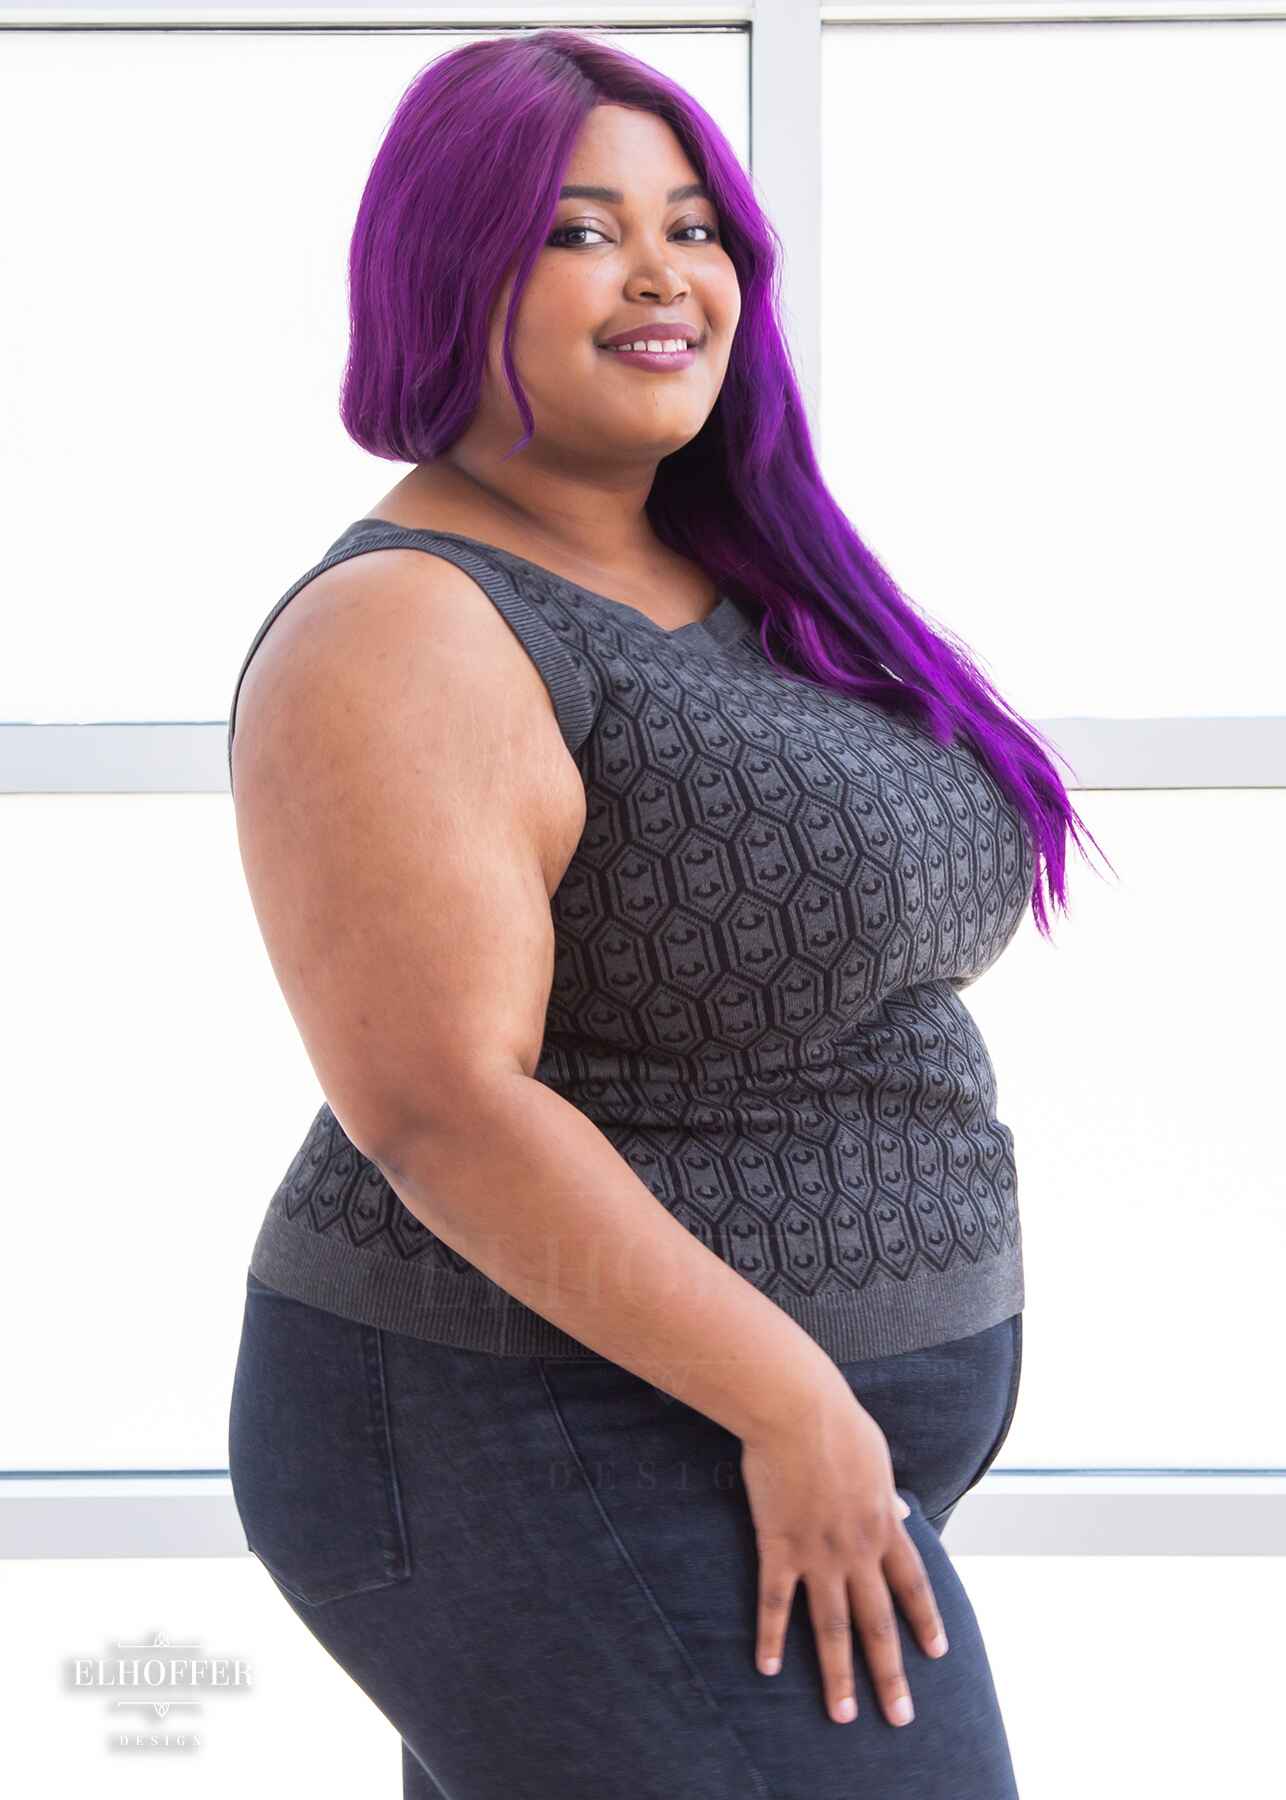 Jade, a light brown skinned 2xl model with long wavy purple hair, is smiling while wearing a knit sleeveless top with a boatneck and an armor plated design